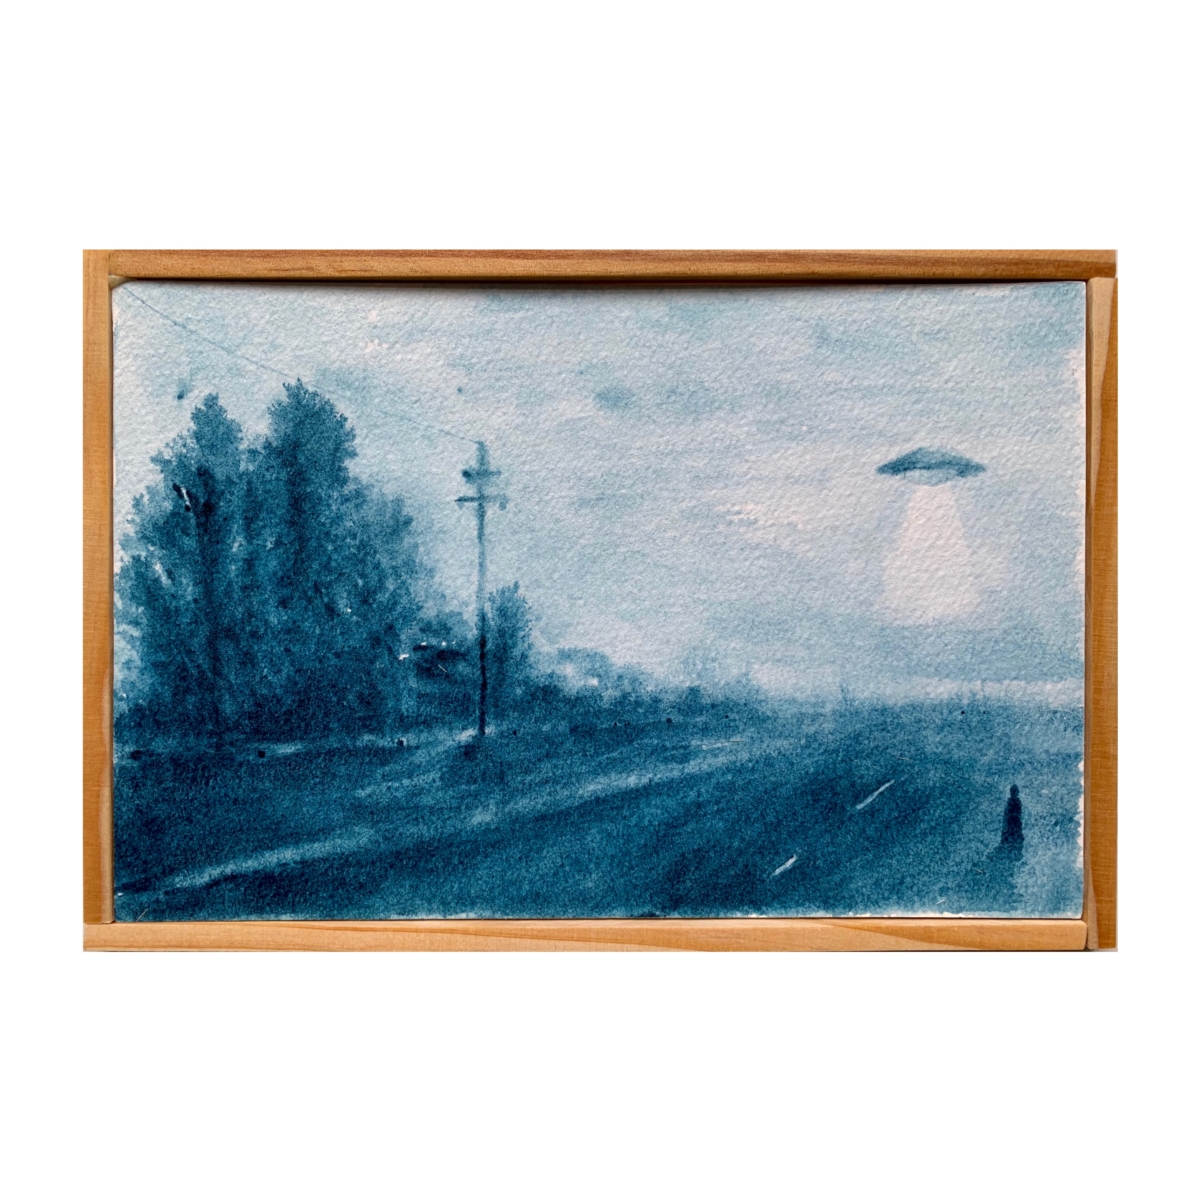 Jia Liu, Encounter: UFO Series, monochrome watercolor on paper, hand framed and mounted on wood boards, 15 x 22cm each 2021 The purpose of exploring alien life is not to solely prove their existence, but also eagerly looking forward to a zero-distance contact with them, even if deep down we are terrified with the fear of the unknown. The contradictory psychology of curiosity and fear indicates mankind’s eternal pursuit of truth. I believe that aliens have visited the Earth and will be in the future, and probably they are among us right now. Therefore they are called Visitors, or the travelers of space-time. And one day we will also become visitors.